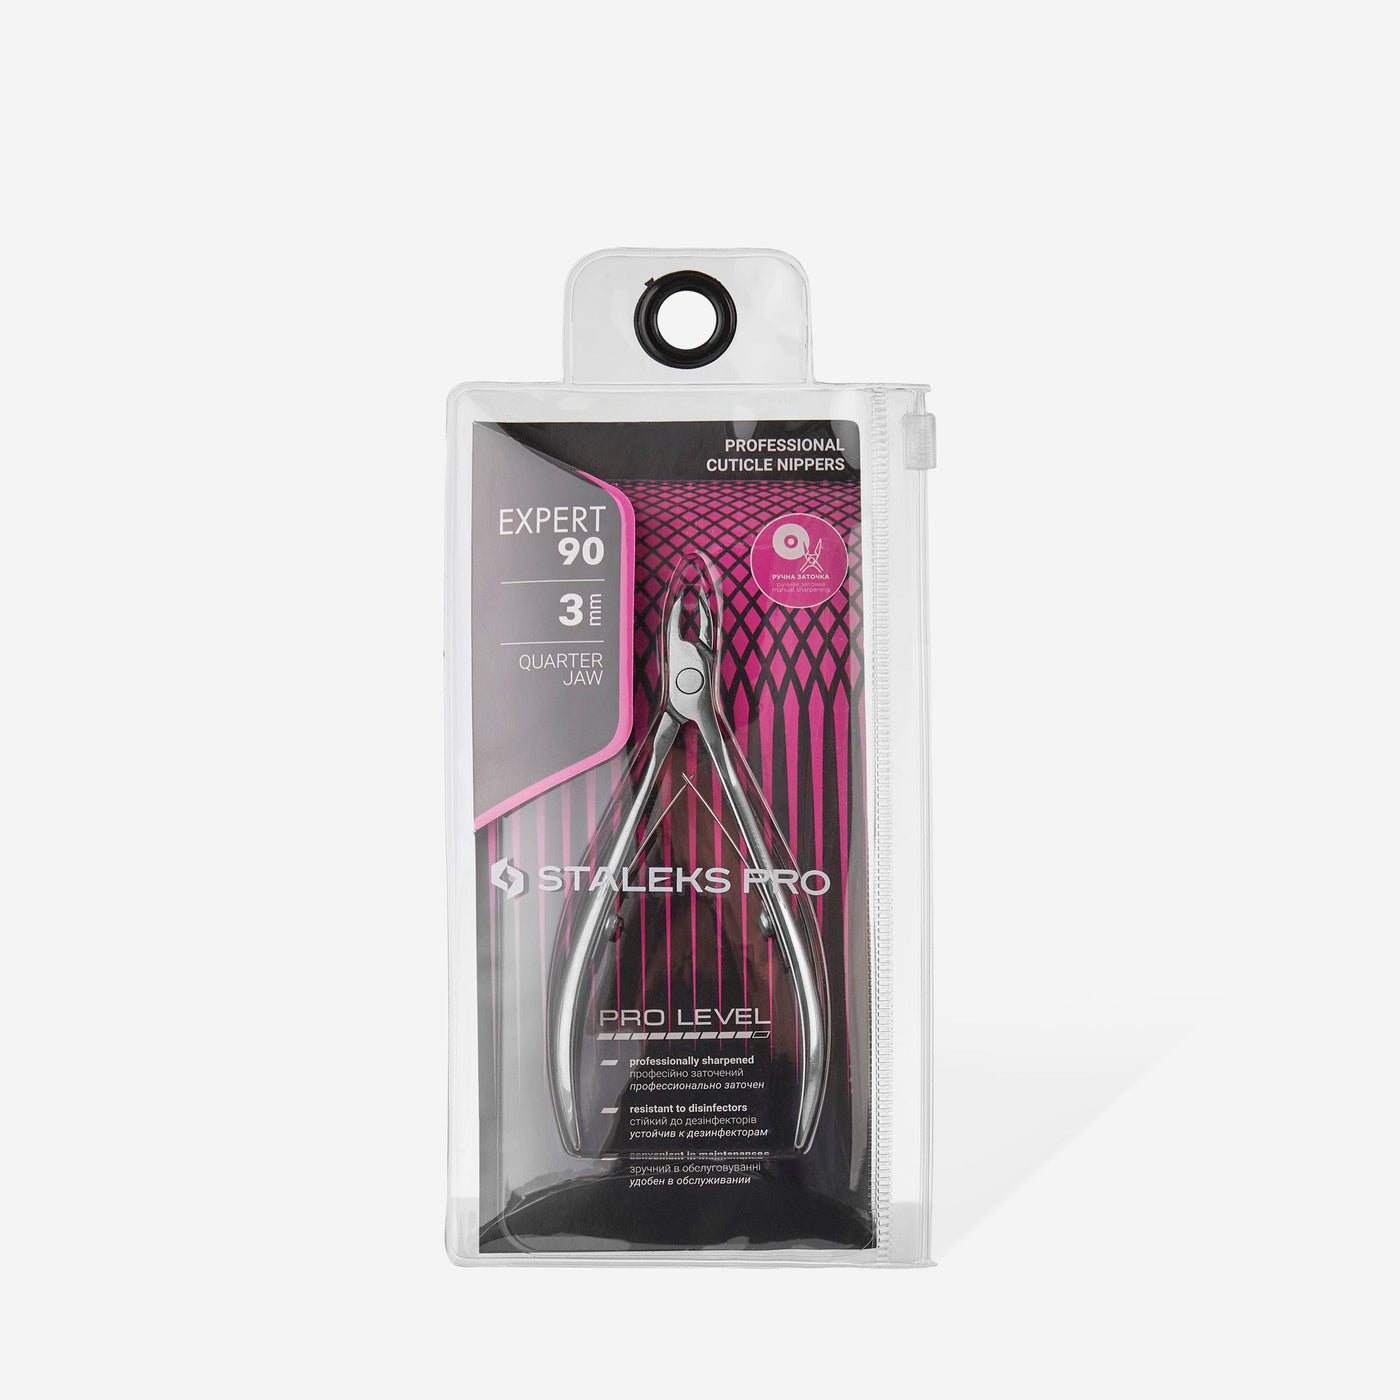 EXPERT 90 | 3 mm - Cuticle Nippers